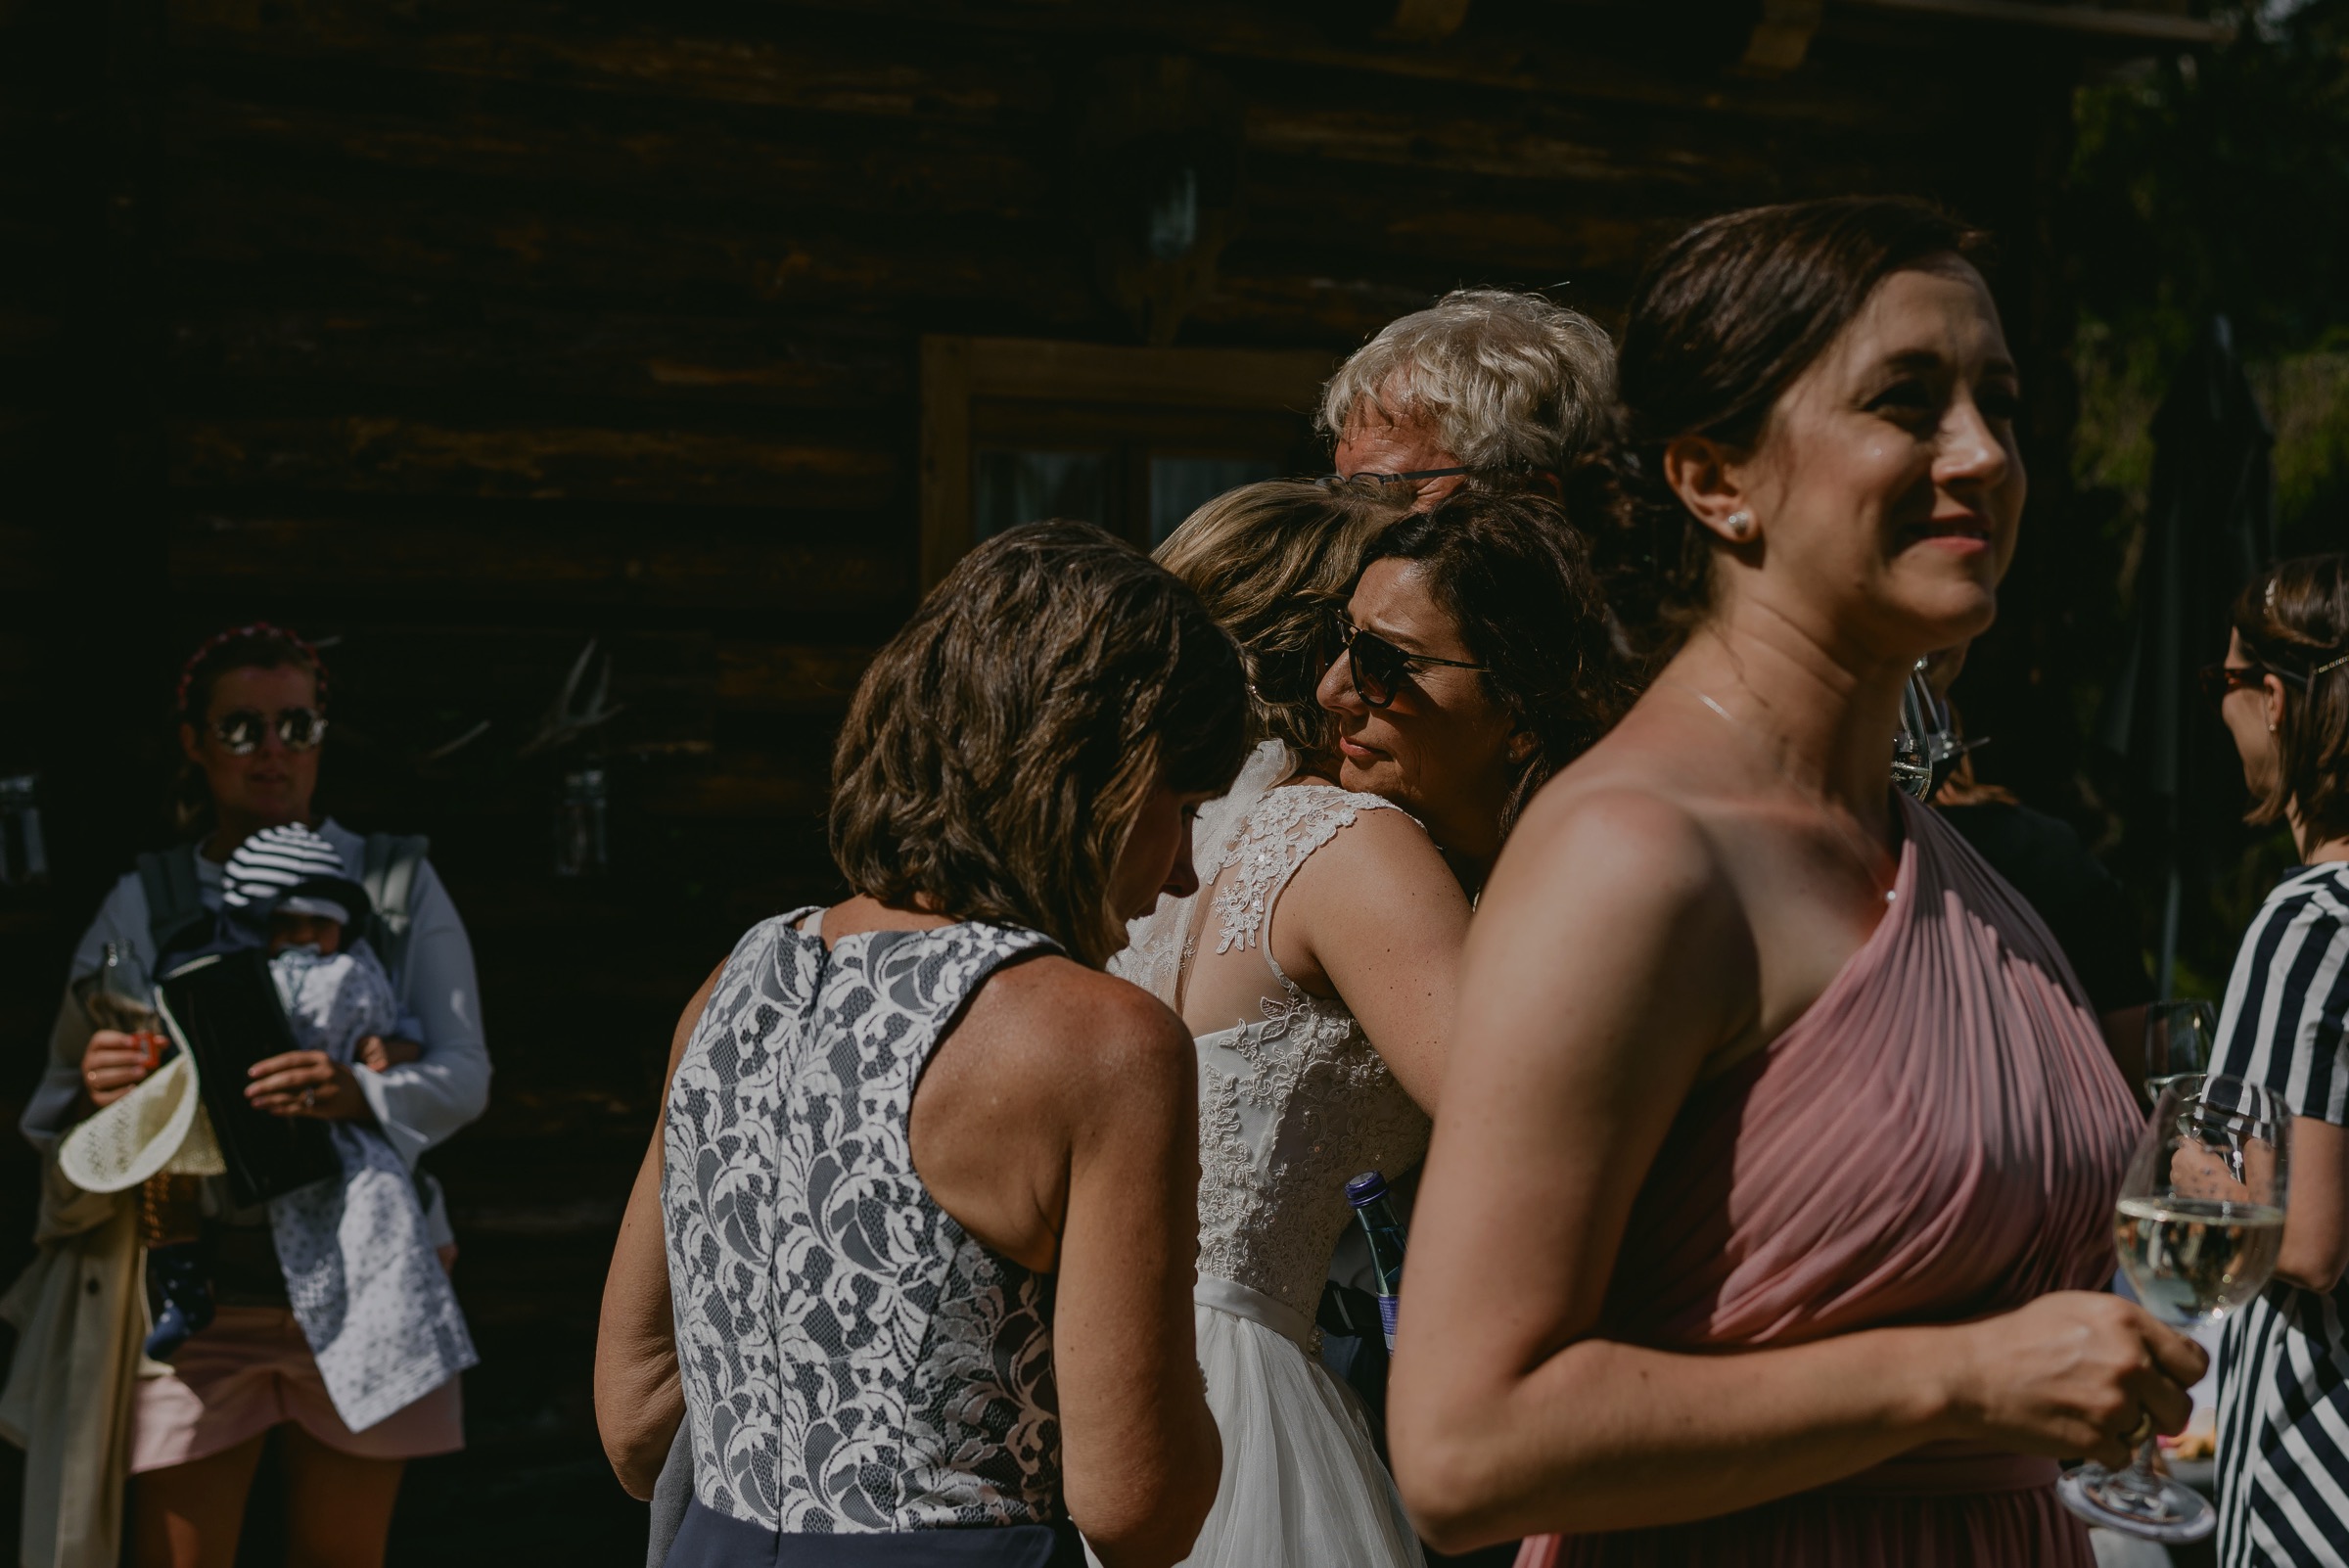 moment at the wedding in austrian alps